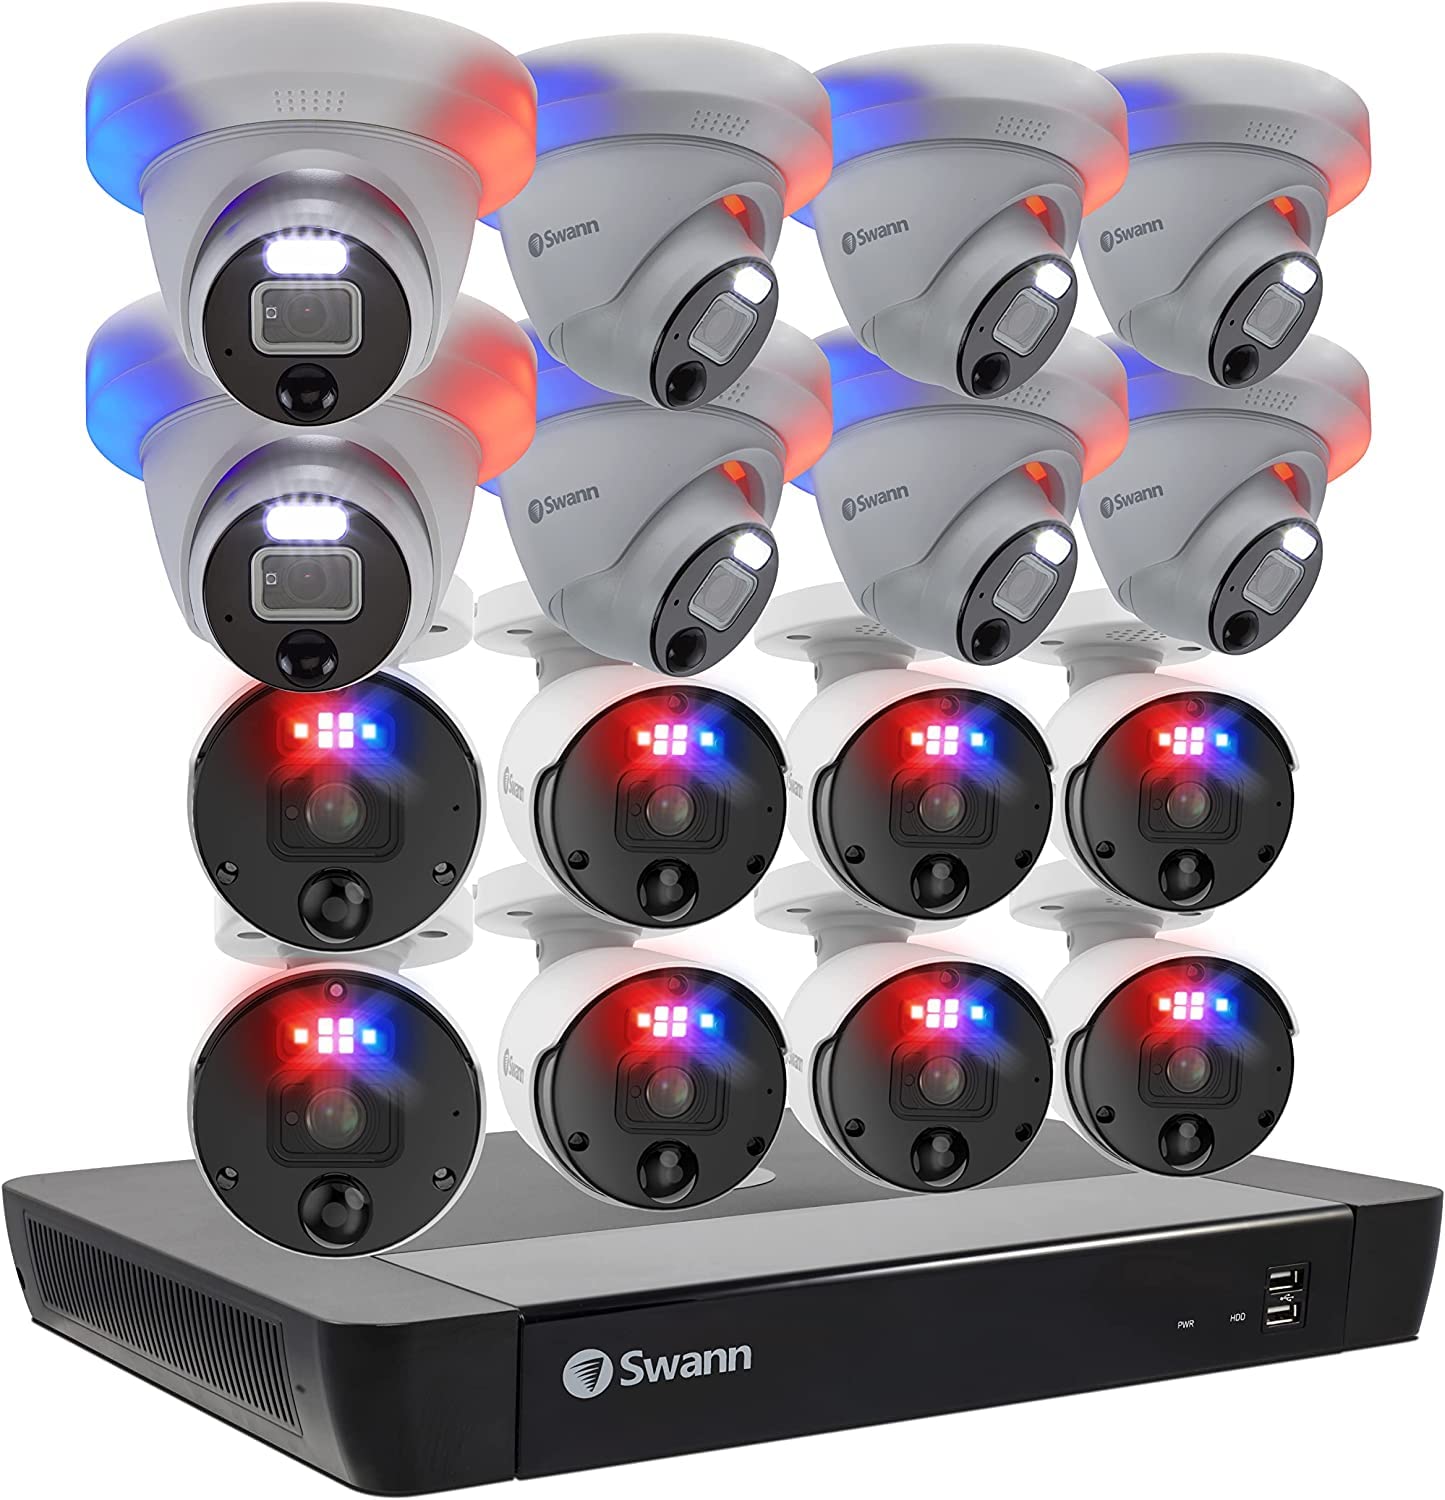 Swann Cameras for Home Security with 4TB HDD, 16 Channel 16 Cam Security Camera, POE Cat5e NVR 12MP HD, Indoor Outdoor Wired Surveillance Camera Systems, Color Night Vision, Heat Motion Detection